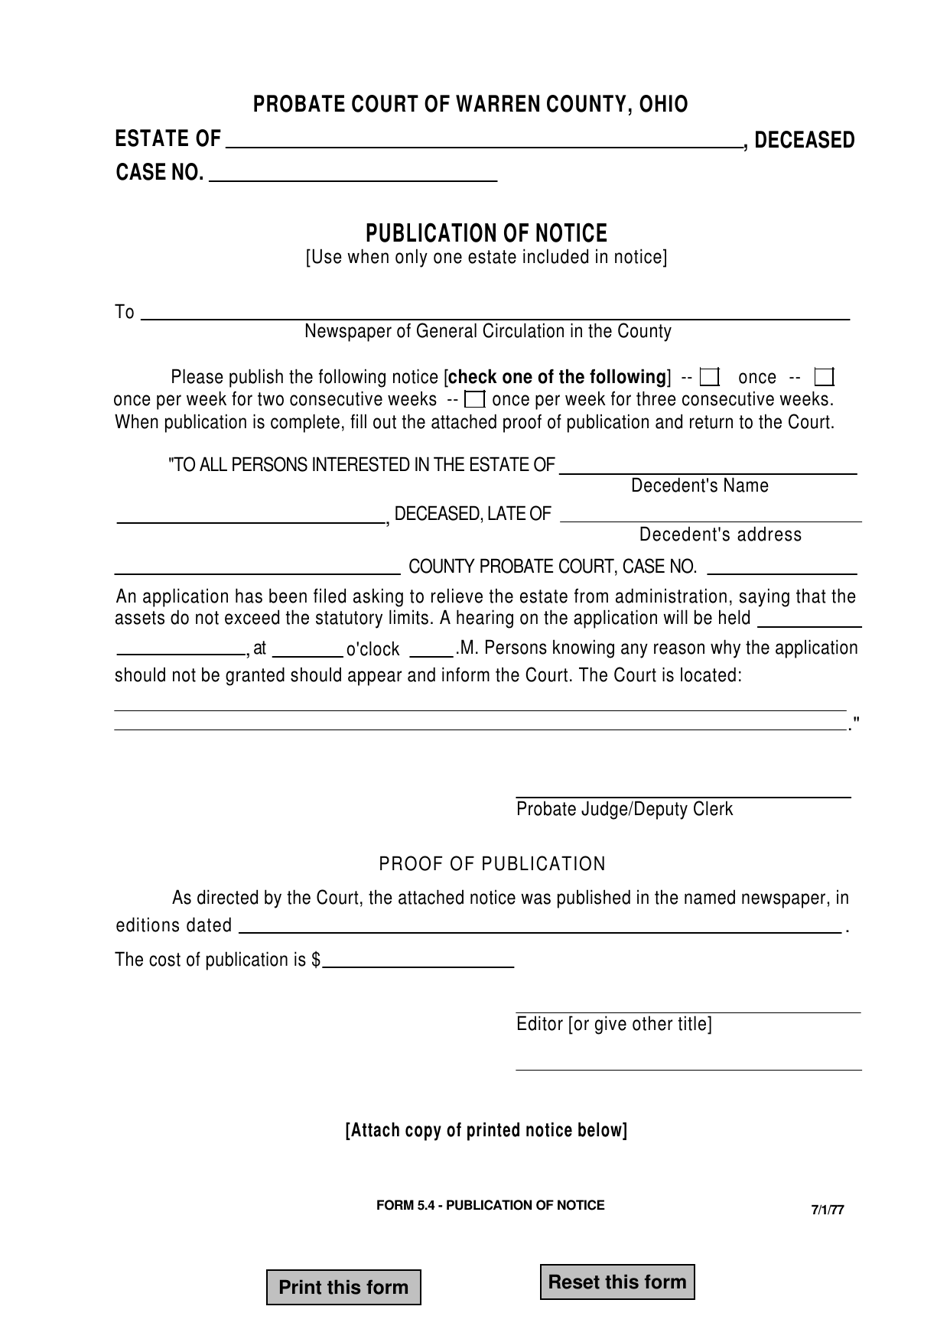 Form 5.4 Publication of Notice - Warren County, Ohio, Page 1